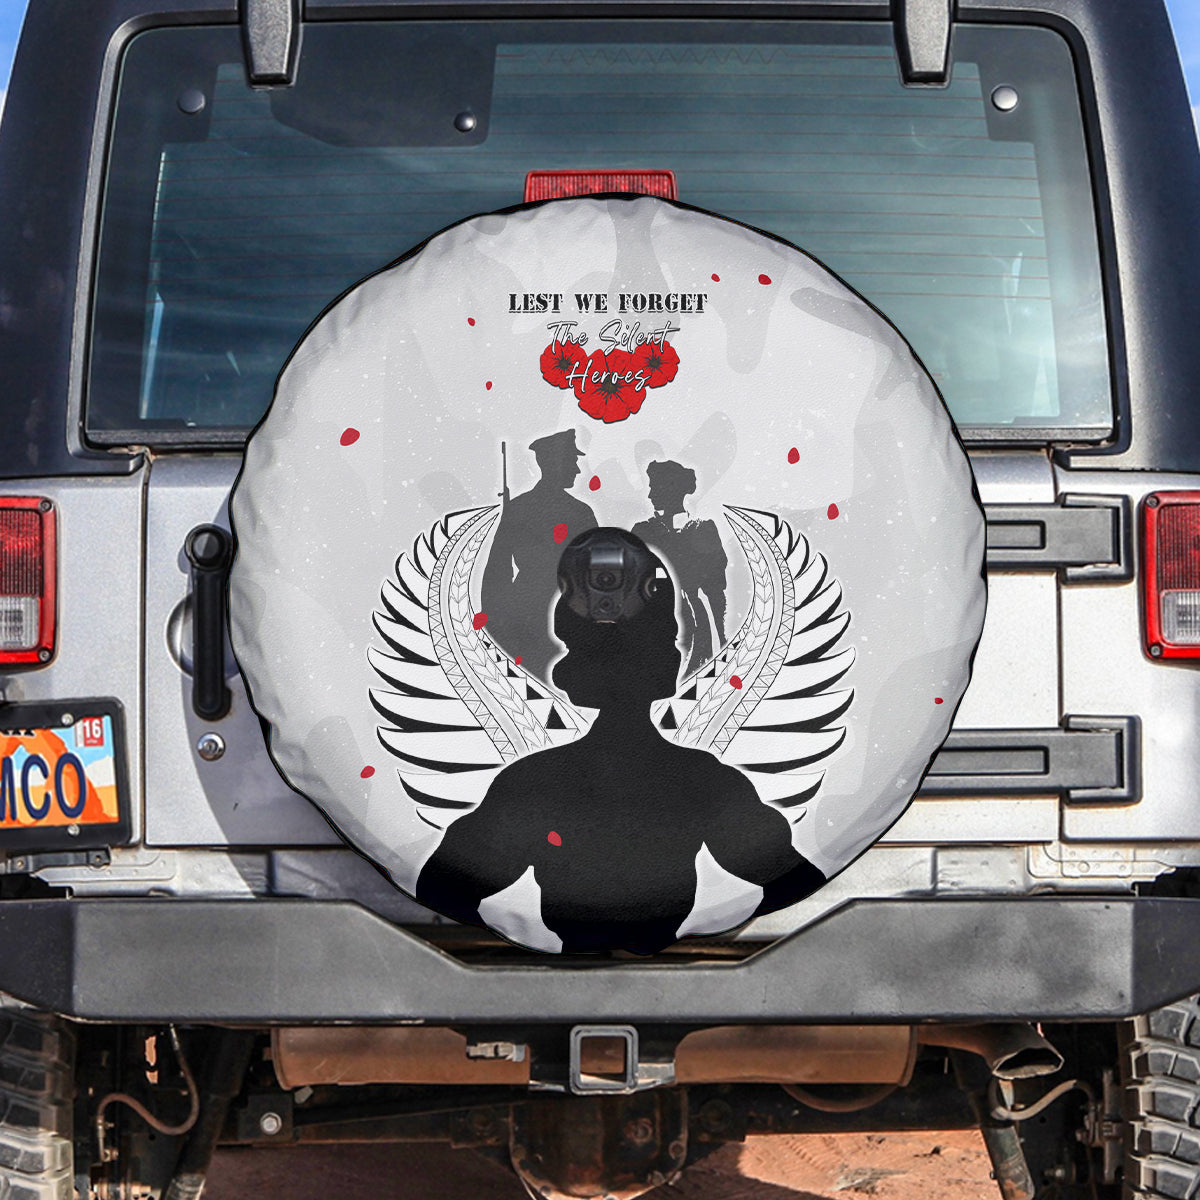 New Zealand ANZAC Day Spare Tire Cover For The Nurse Lest We Forget